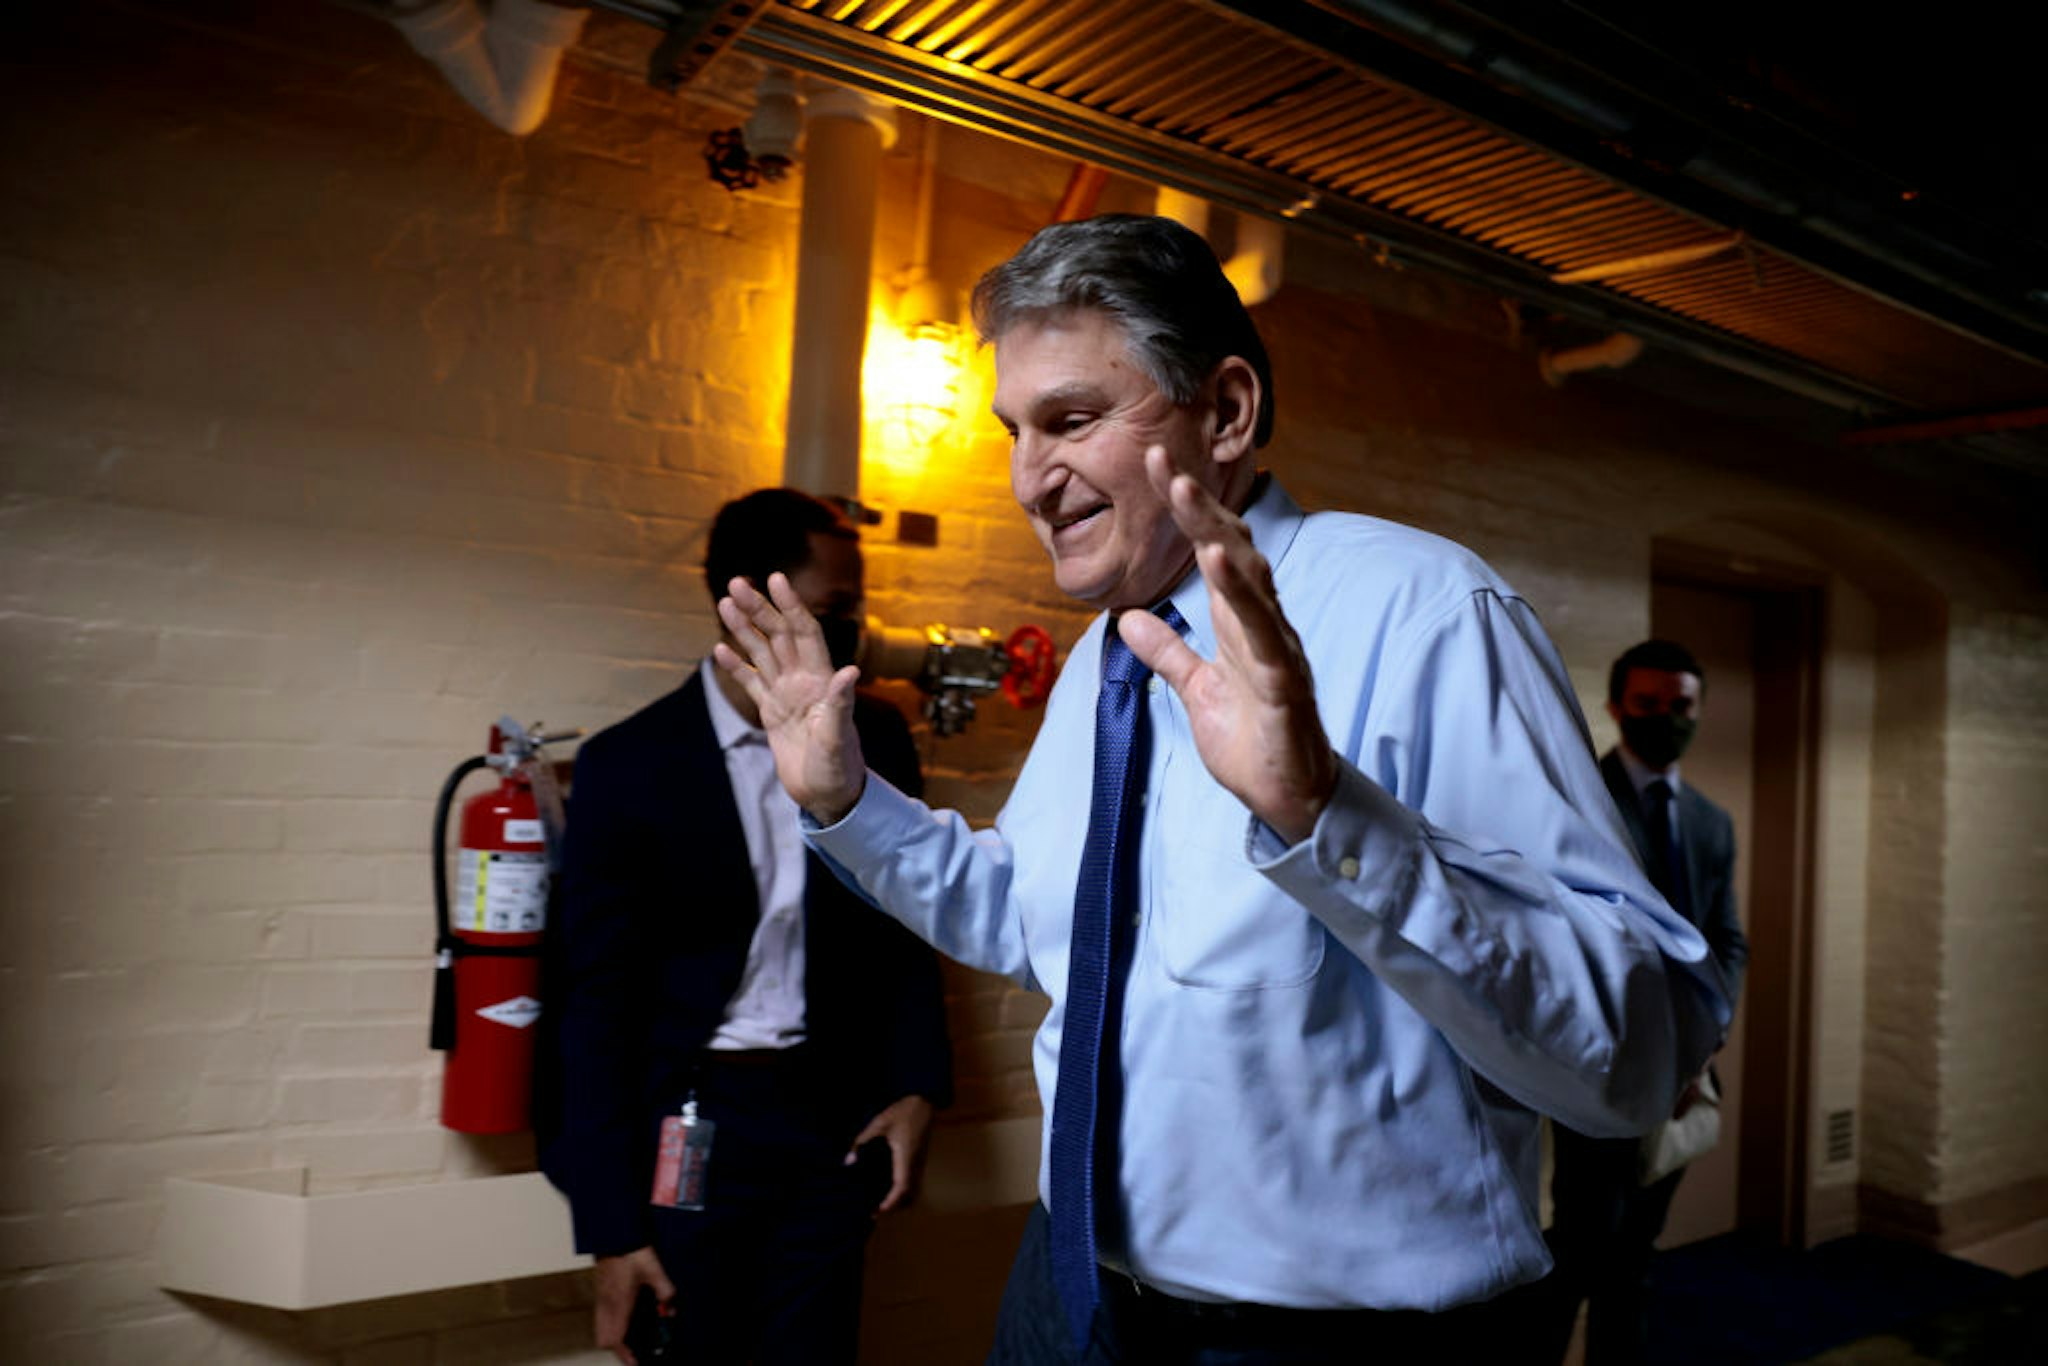 WASHINGTON, DC - DECEMBER 15: Sen. Joe Manchin (D-WV) walks out of a meeting with fellow Democratic senators for a break in the basement of the U.S. Capitol Building on December 15, 2021 in Washington, DC. The senators held the meeting to discuss senate rules with their staff members. (Photo by Anna Moneymaker/Getty Images)